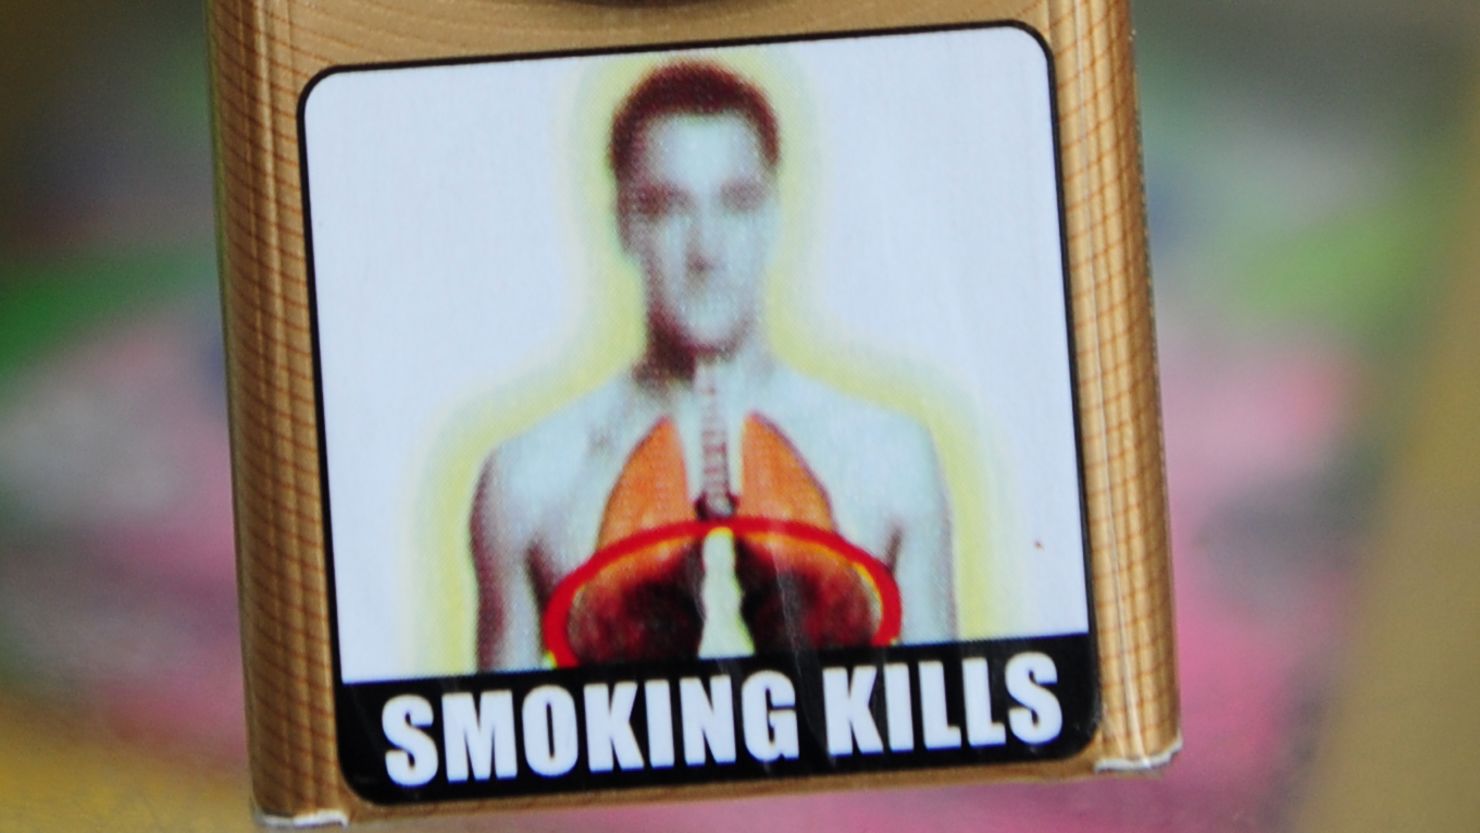 A packet of cigarettes adorned with an image said to resemble that of Chelsea and England footballer John Terry.